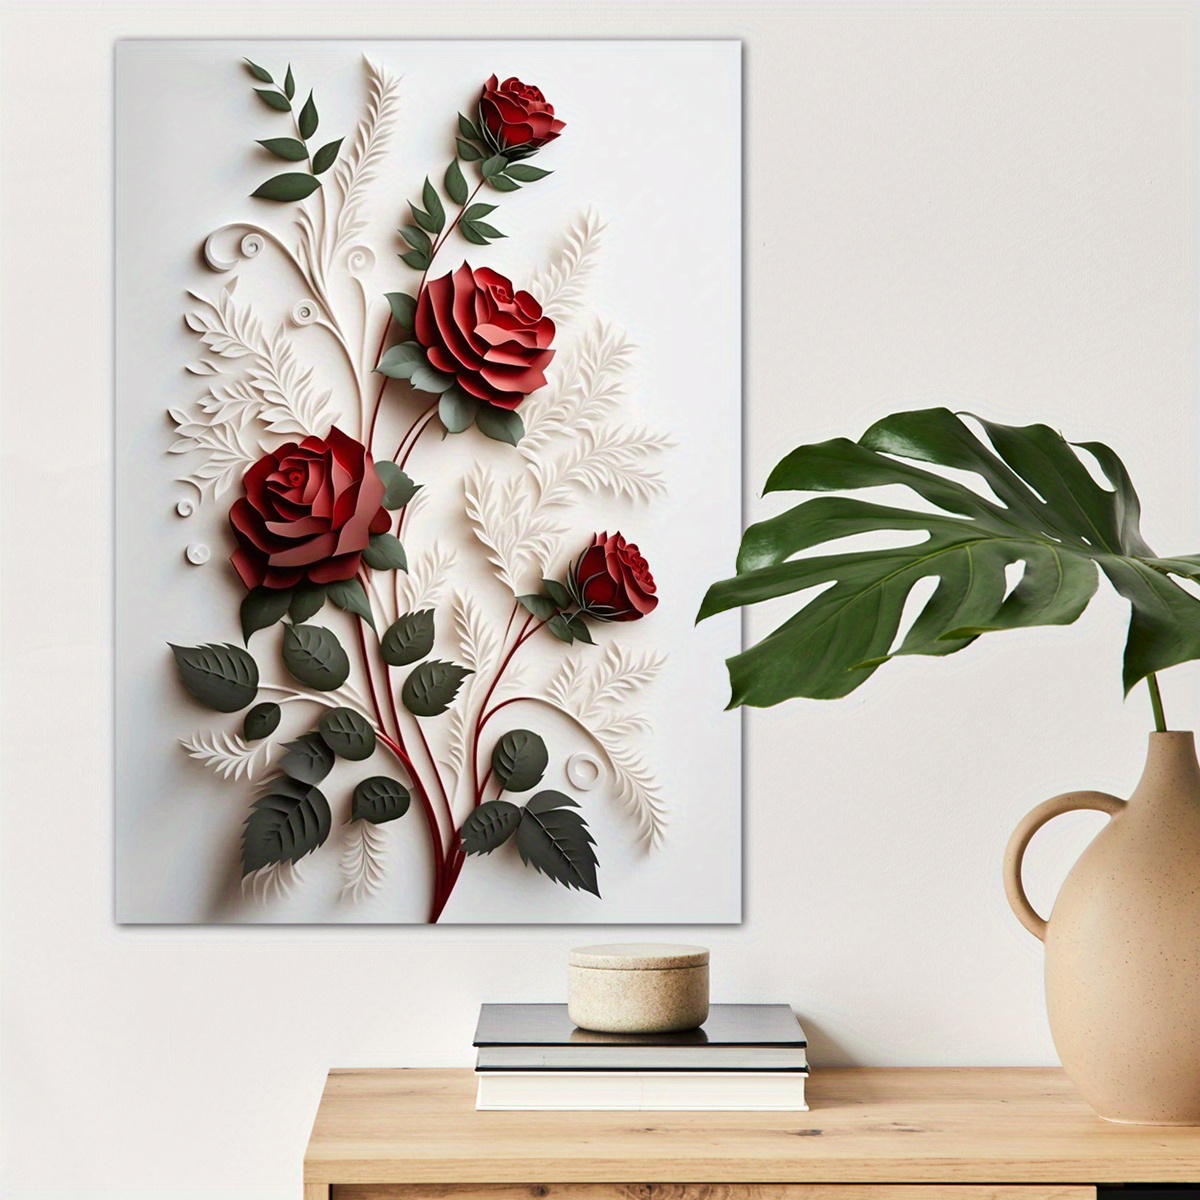 

1pc Colorful Flowers Canvas Wall Art For Home Decor, Modern Poster Wall Decor, 3d Effect Canvas Prints For Living Room Bedroom Kitchen Office Cafe Decor, Perfect Gift And Decoration